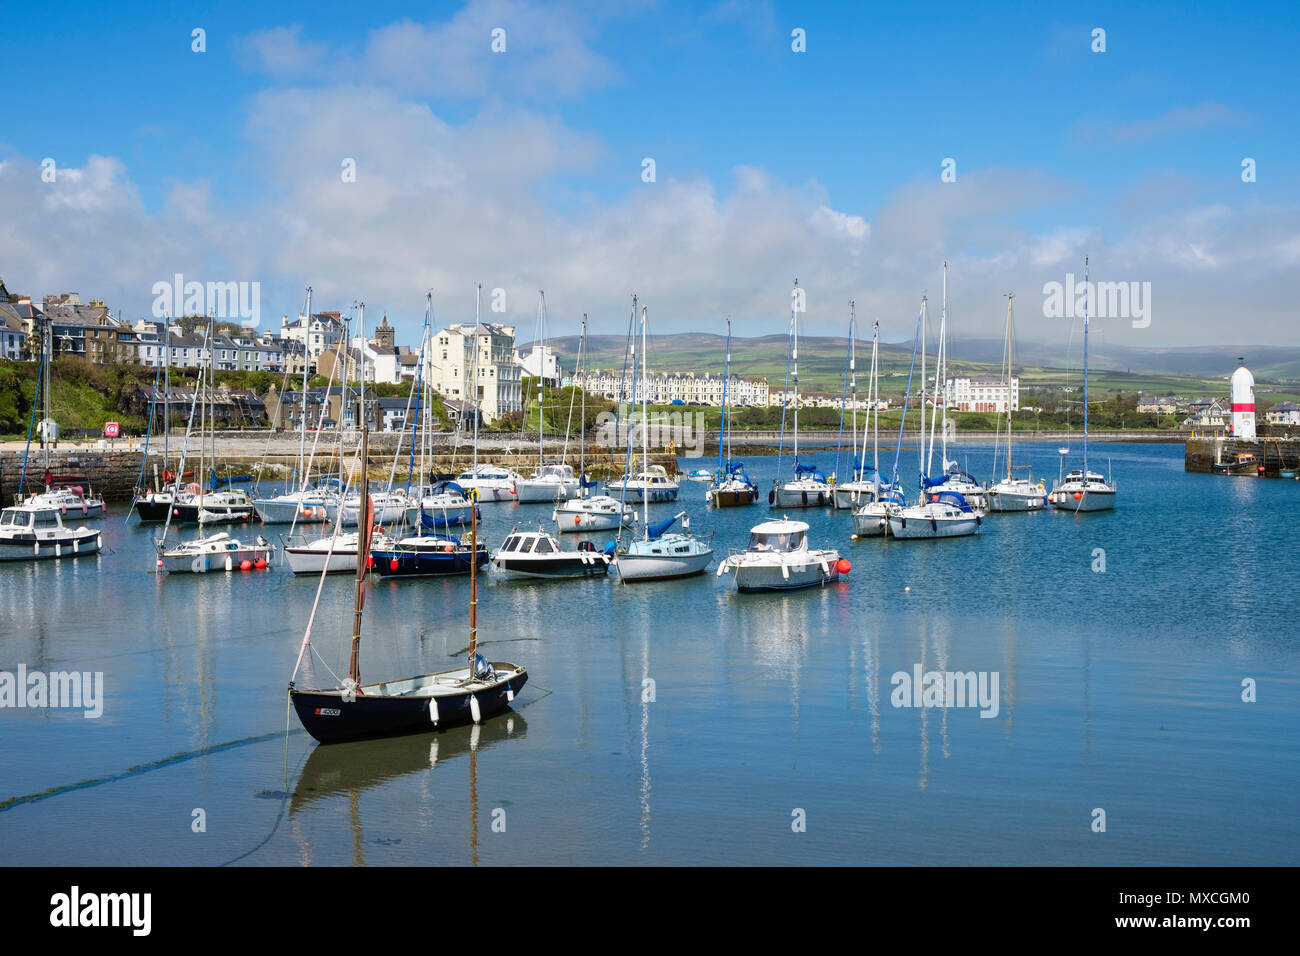 Boats moored in pretty harbour at Port St Mary, Isle of Man, British Isles Stock Photo